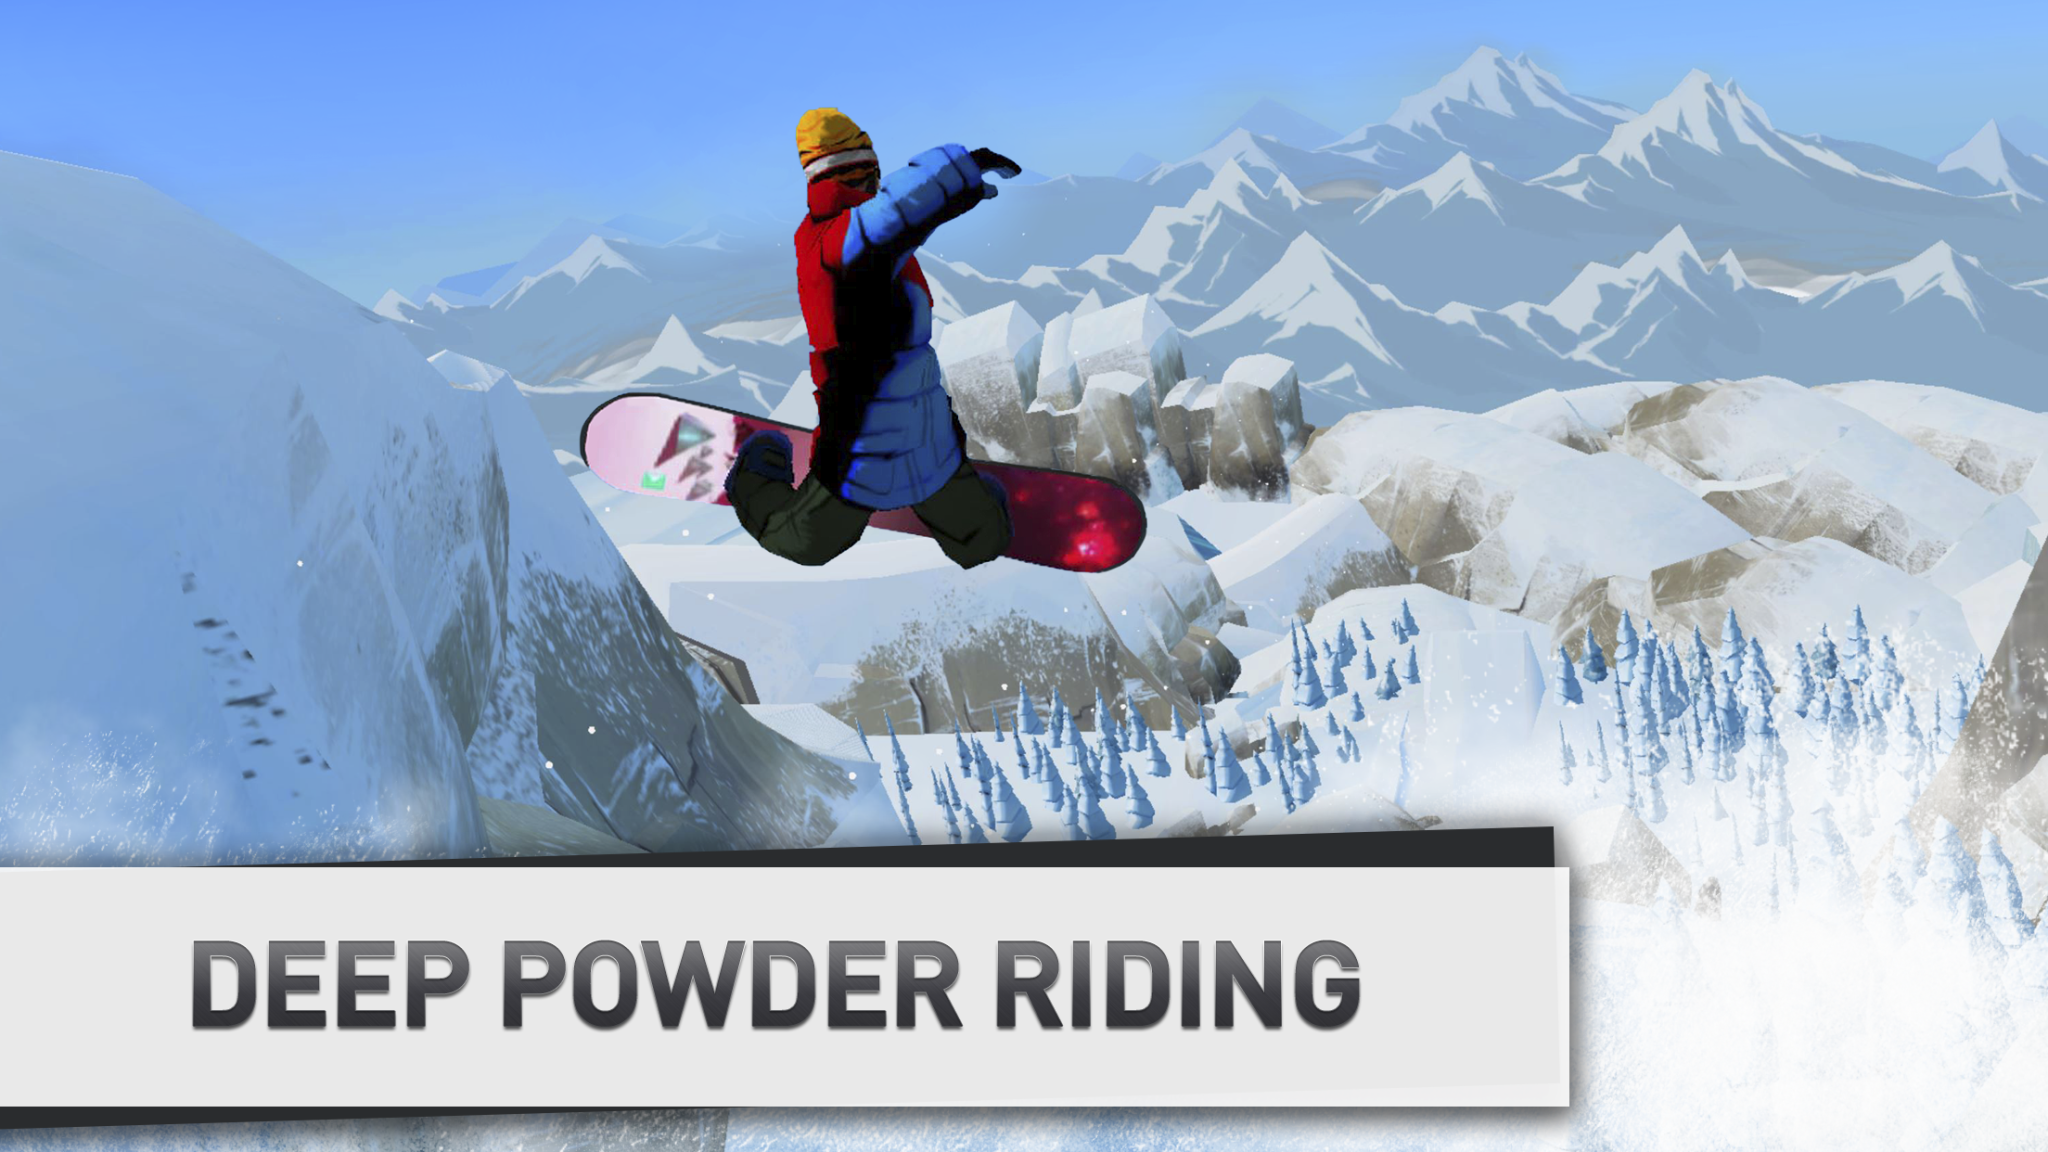 Snowboarding Session Games